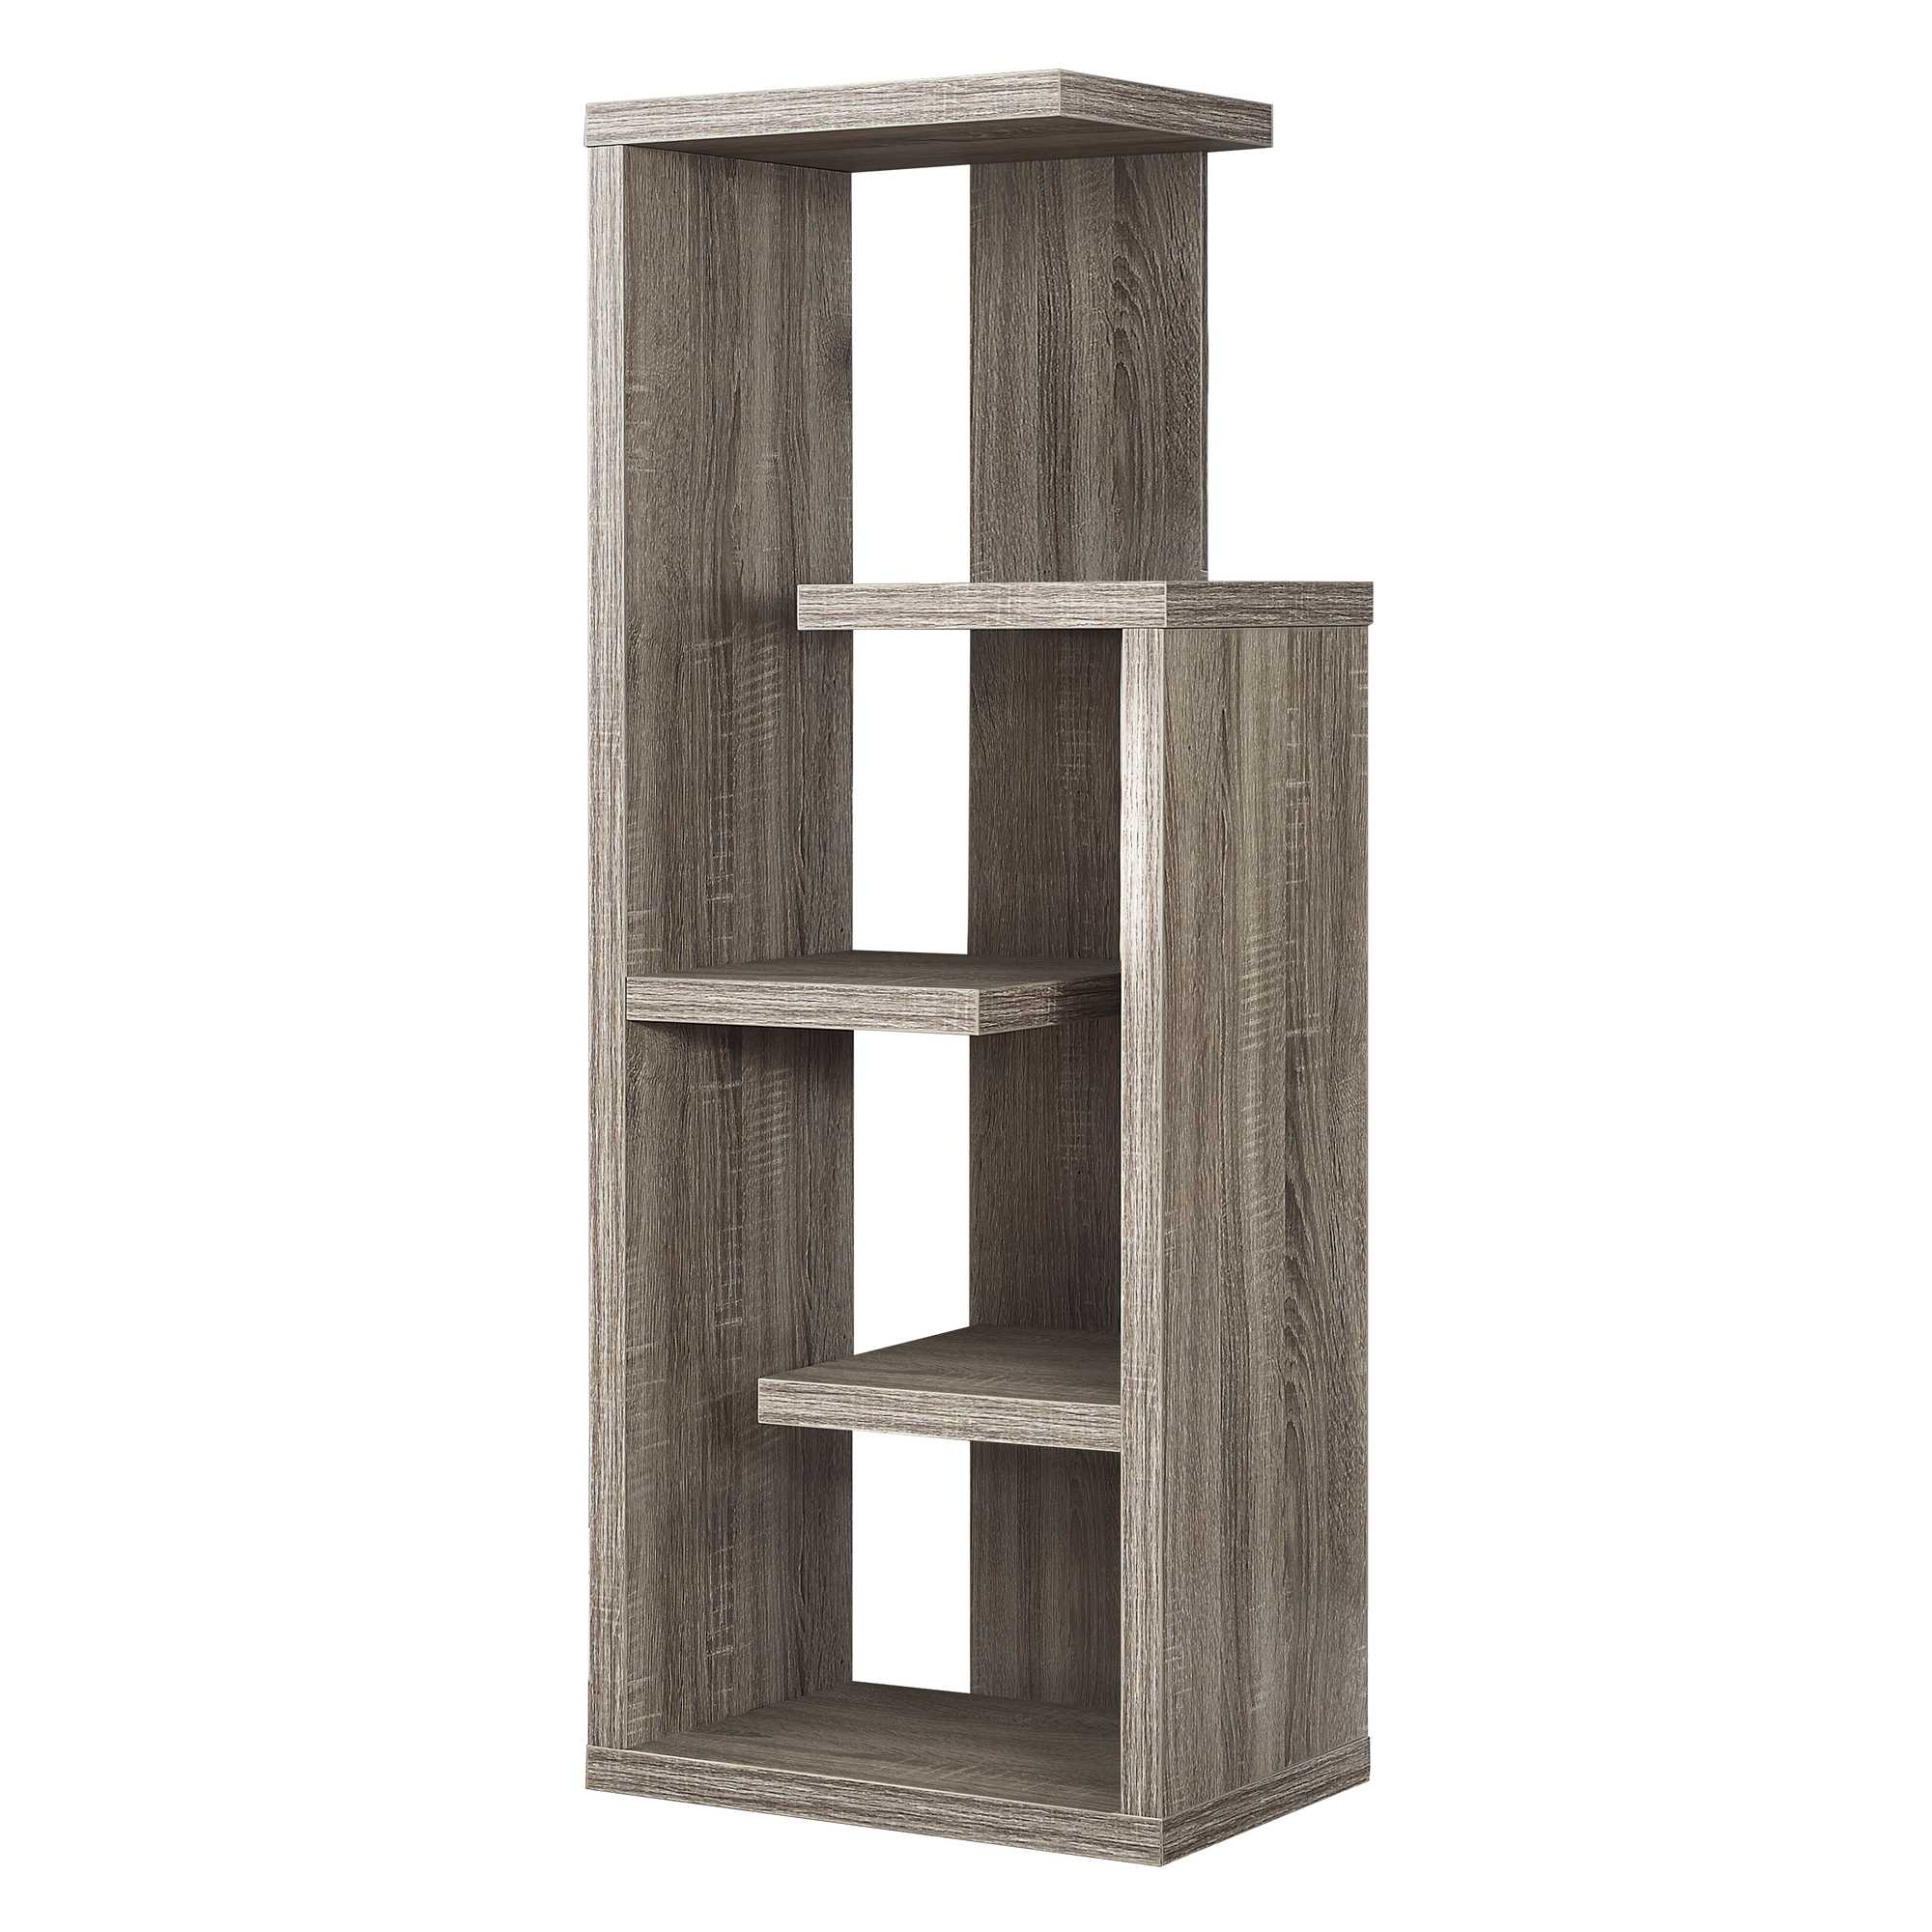 12" x 18.5" x 47.25" Dark Taupe Particle Board Hollow Core Bookcase